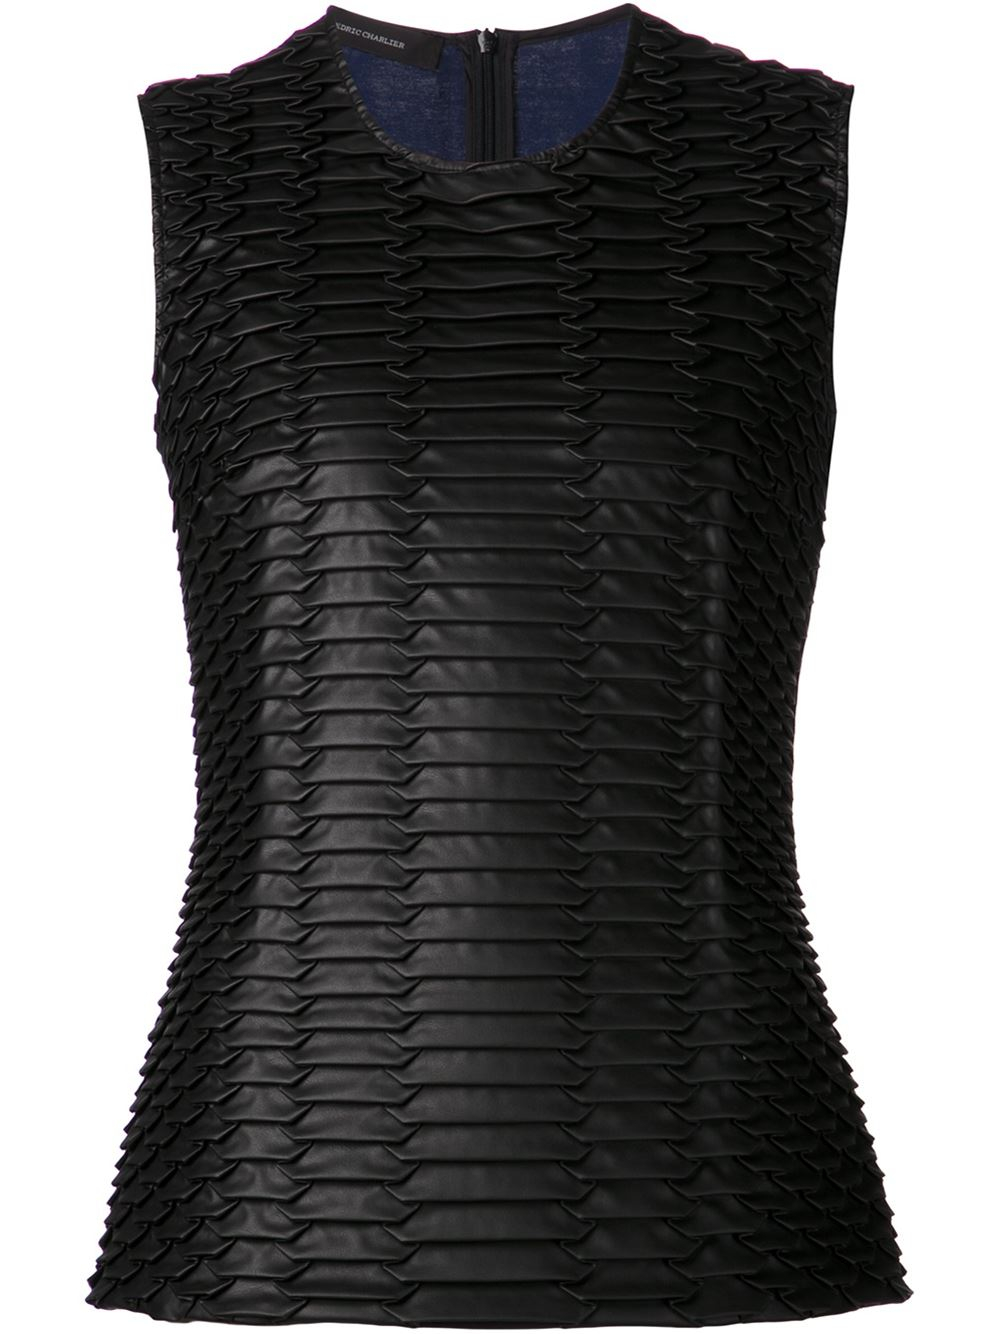 Lyst - Cedric charlier Faux Leather Tank Top in Black